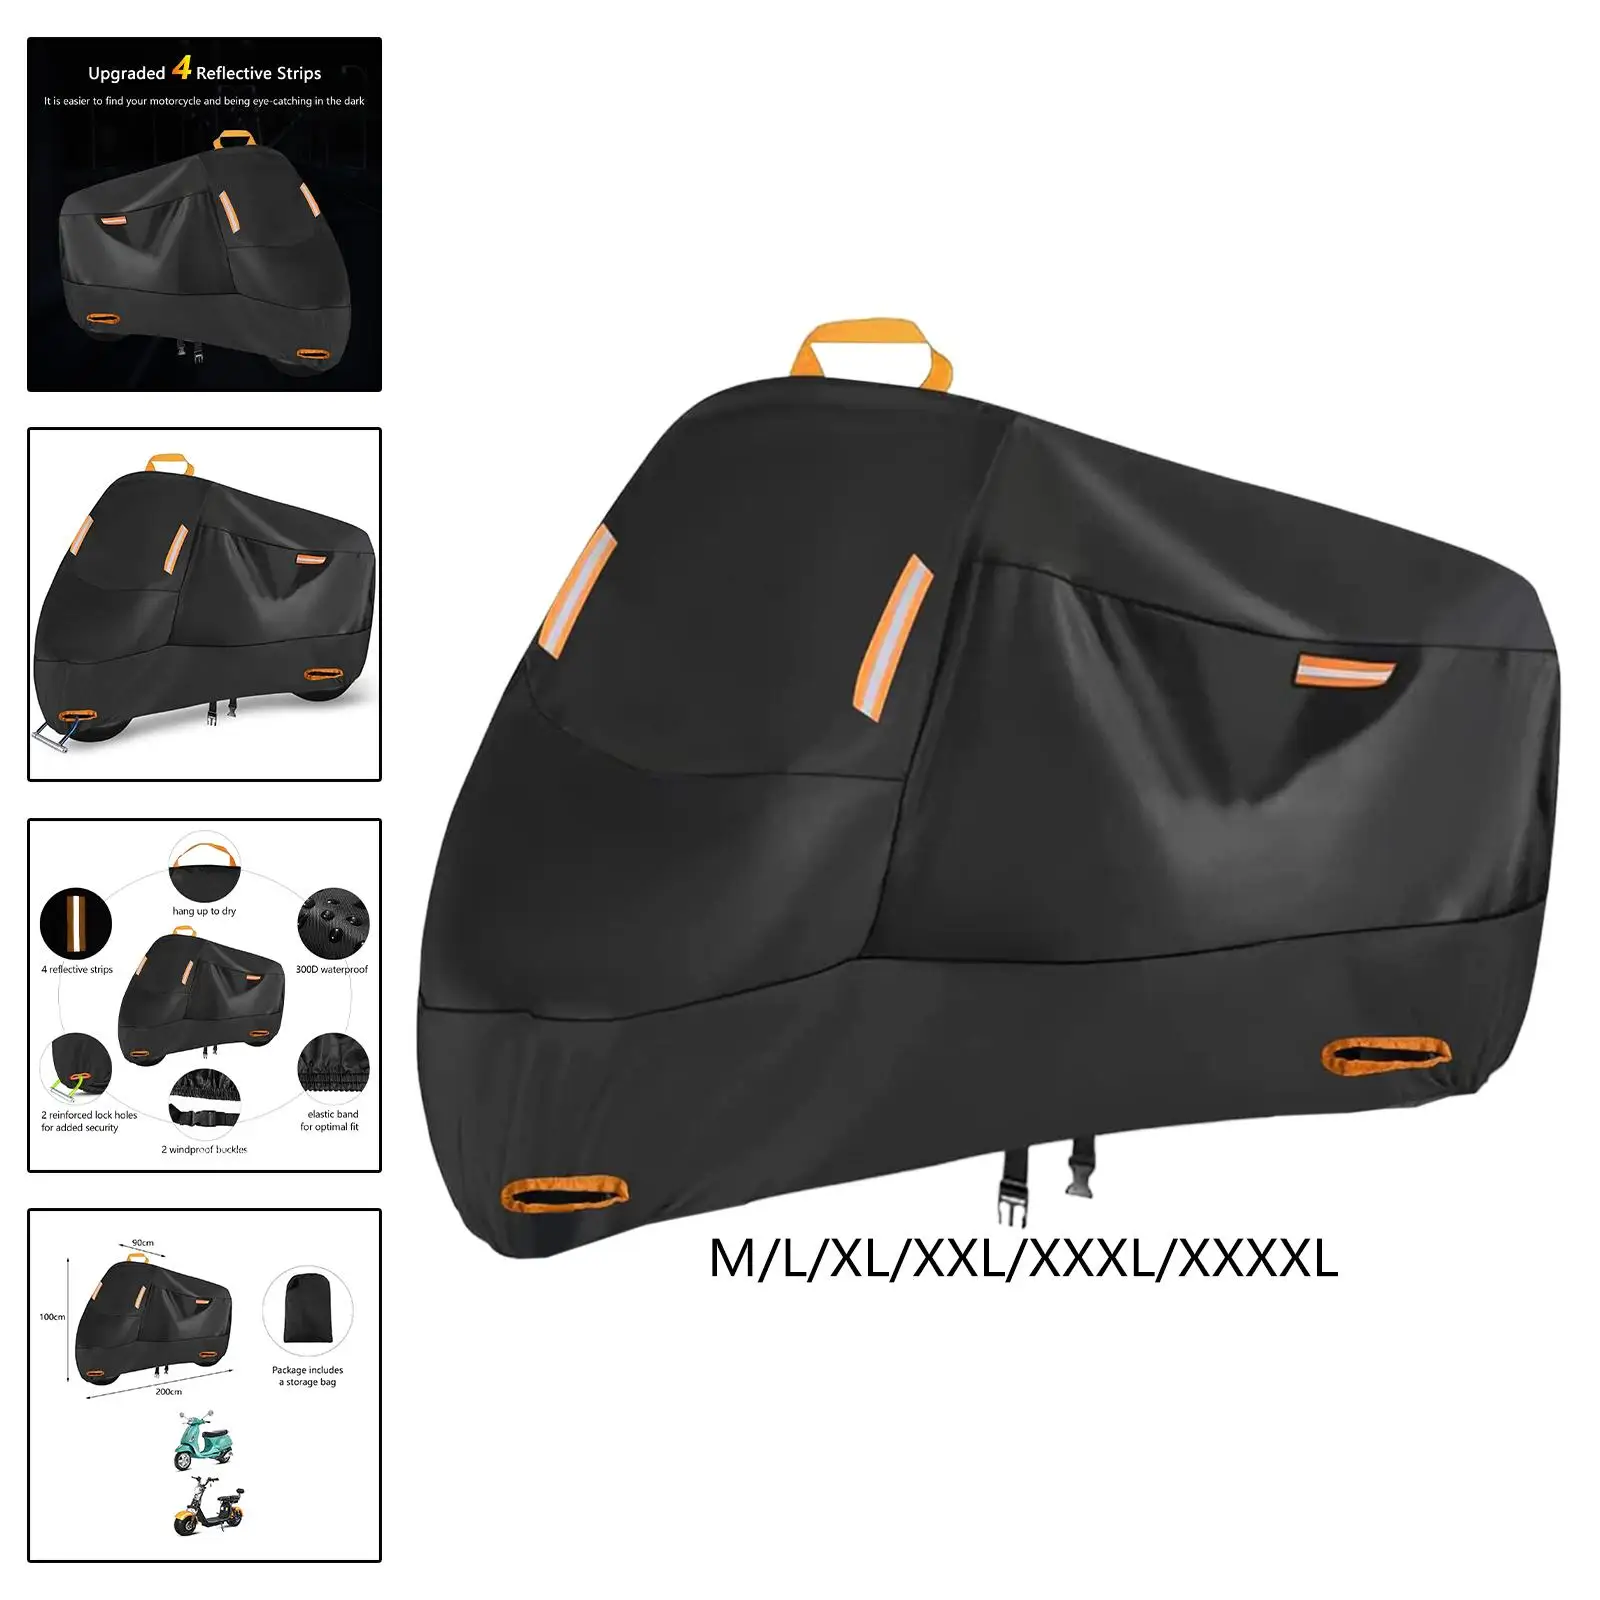 Motorcycle Cover with 4 Reflective Strips Motorbike Cover for Motorbike